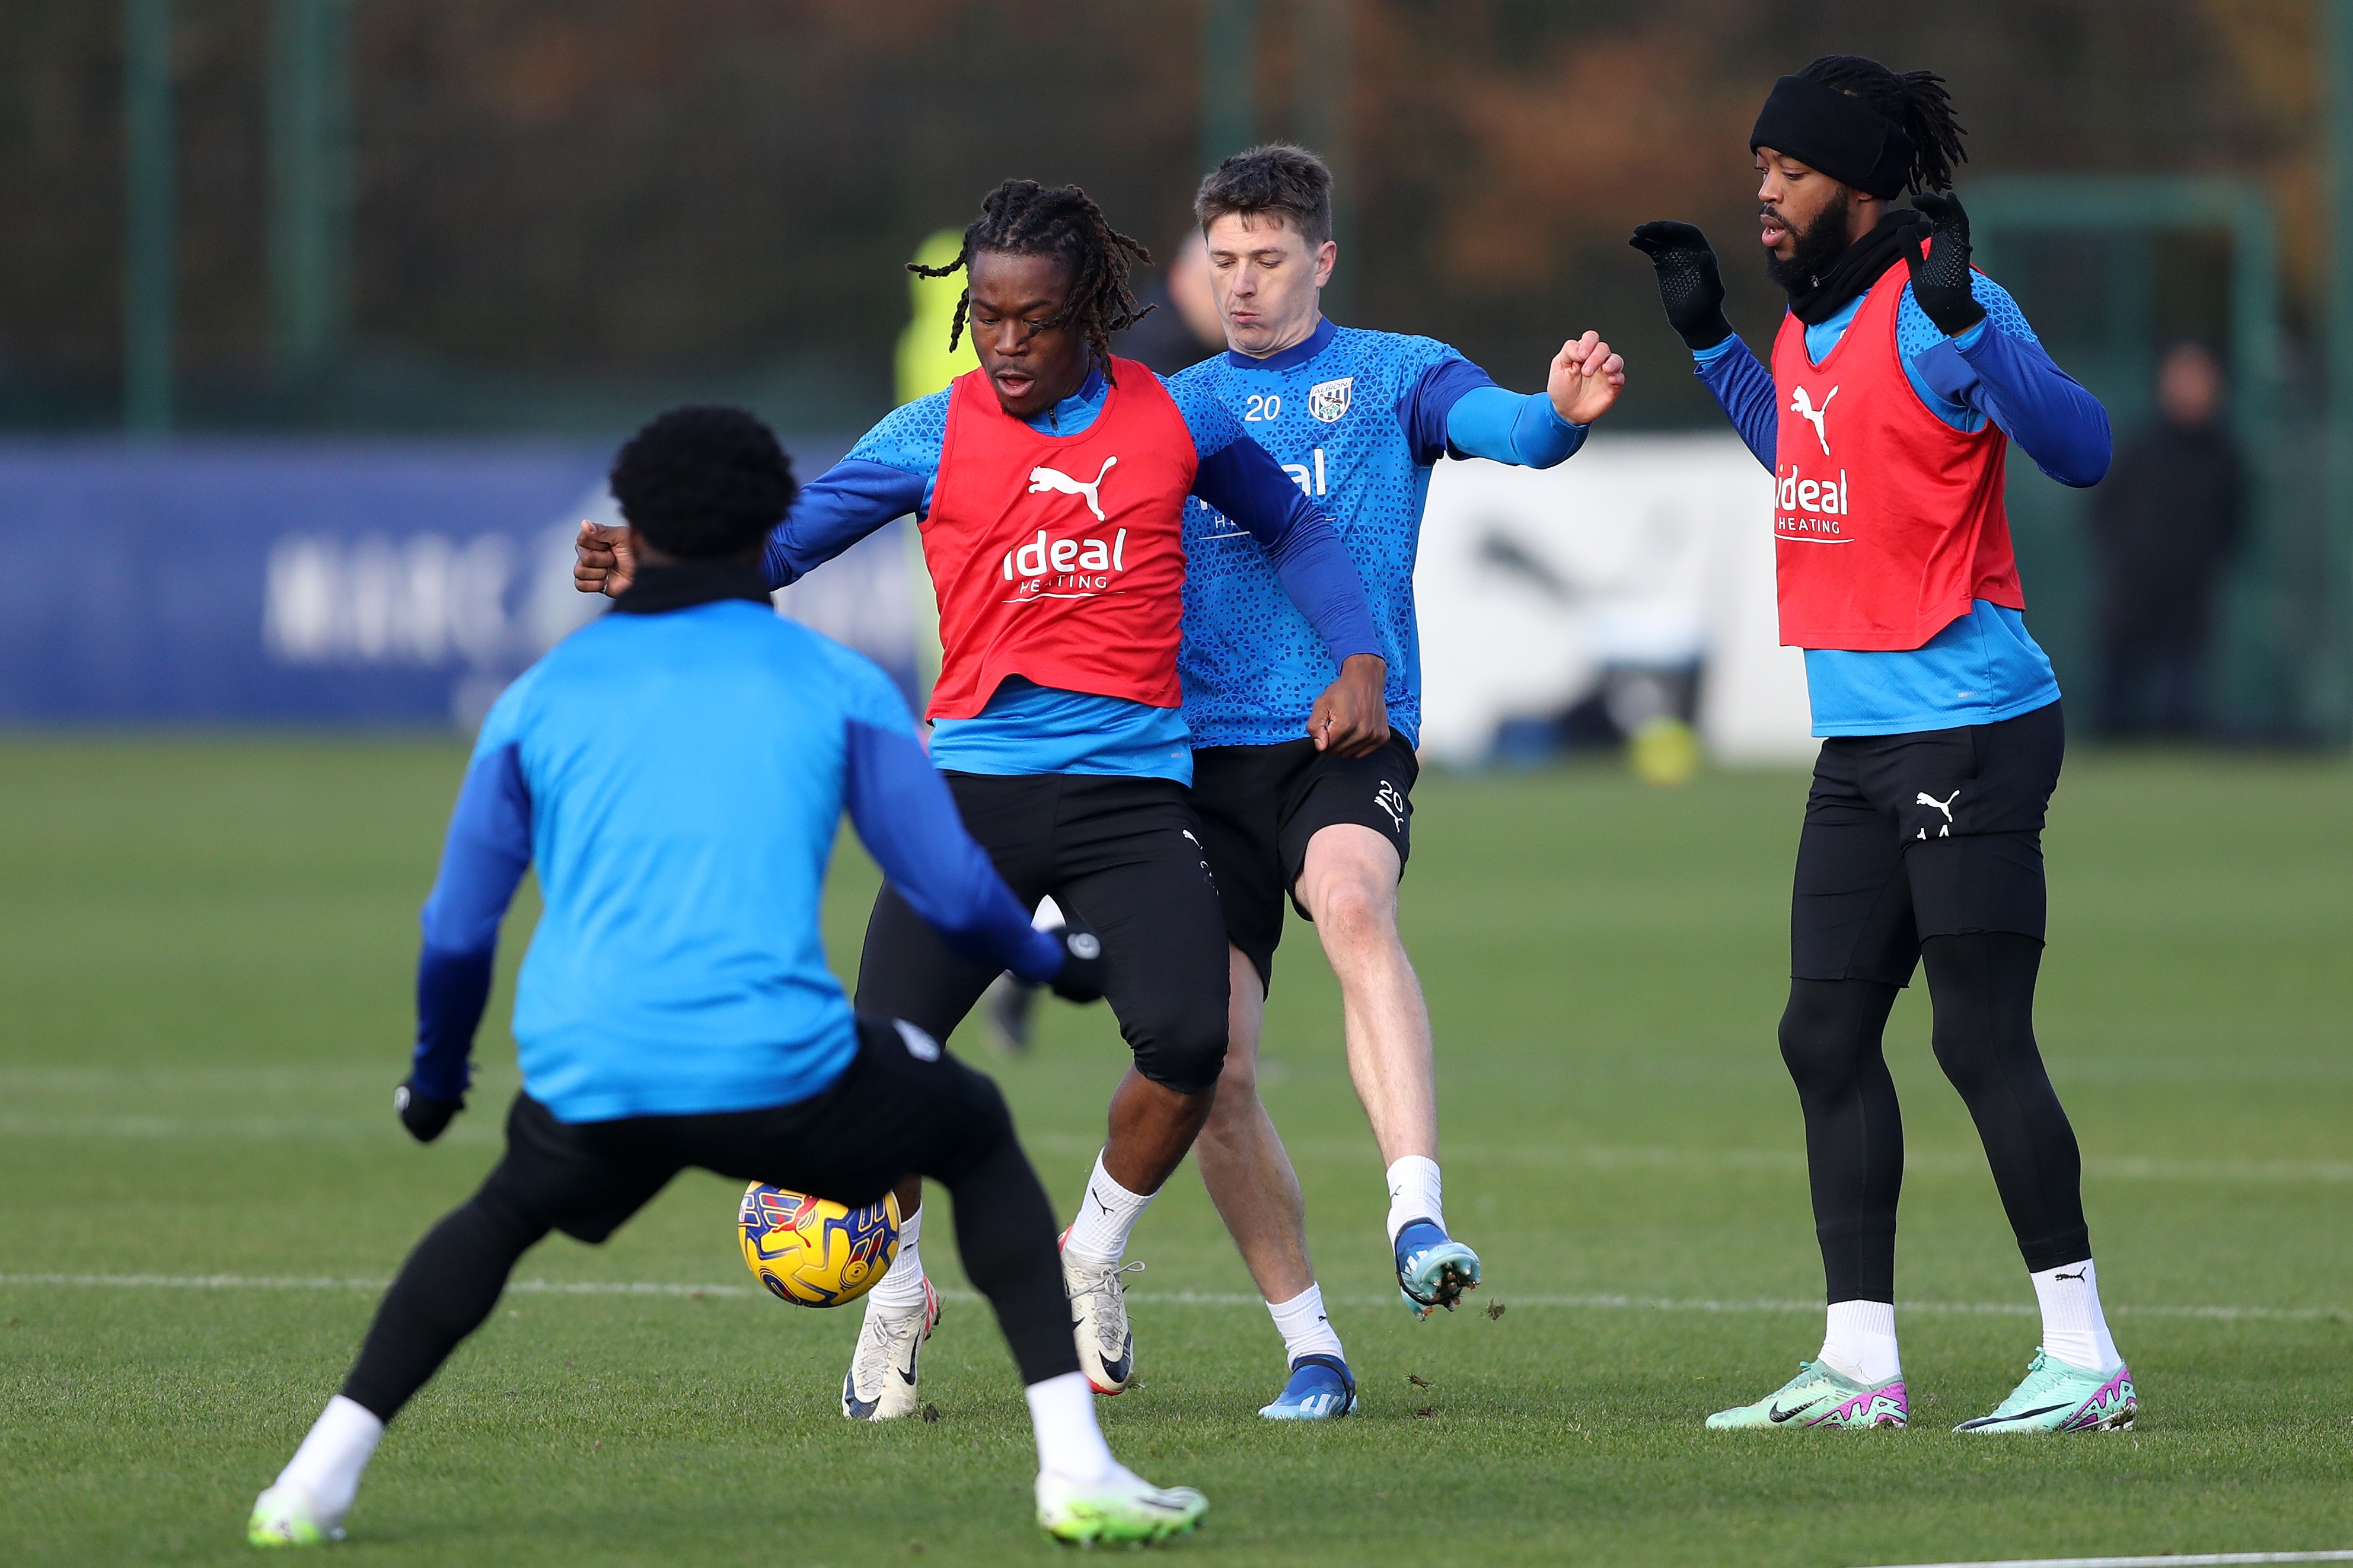 Brandon Thomas-Asante under pressure from other players in training 